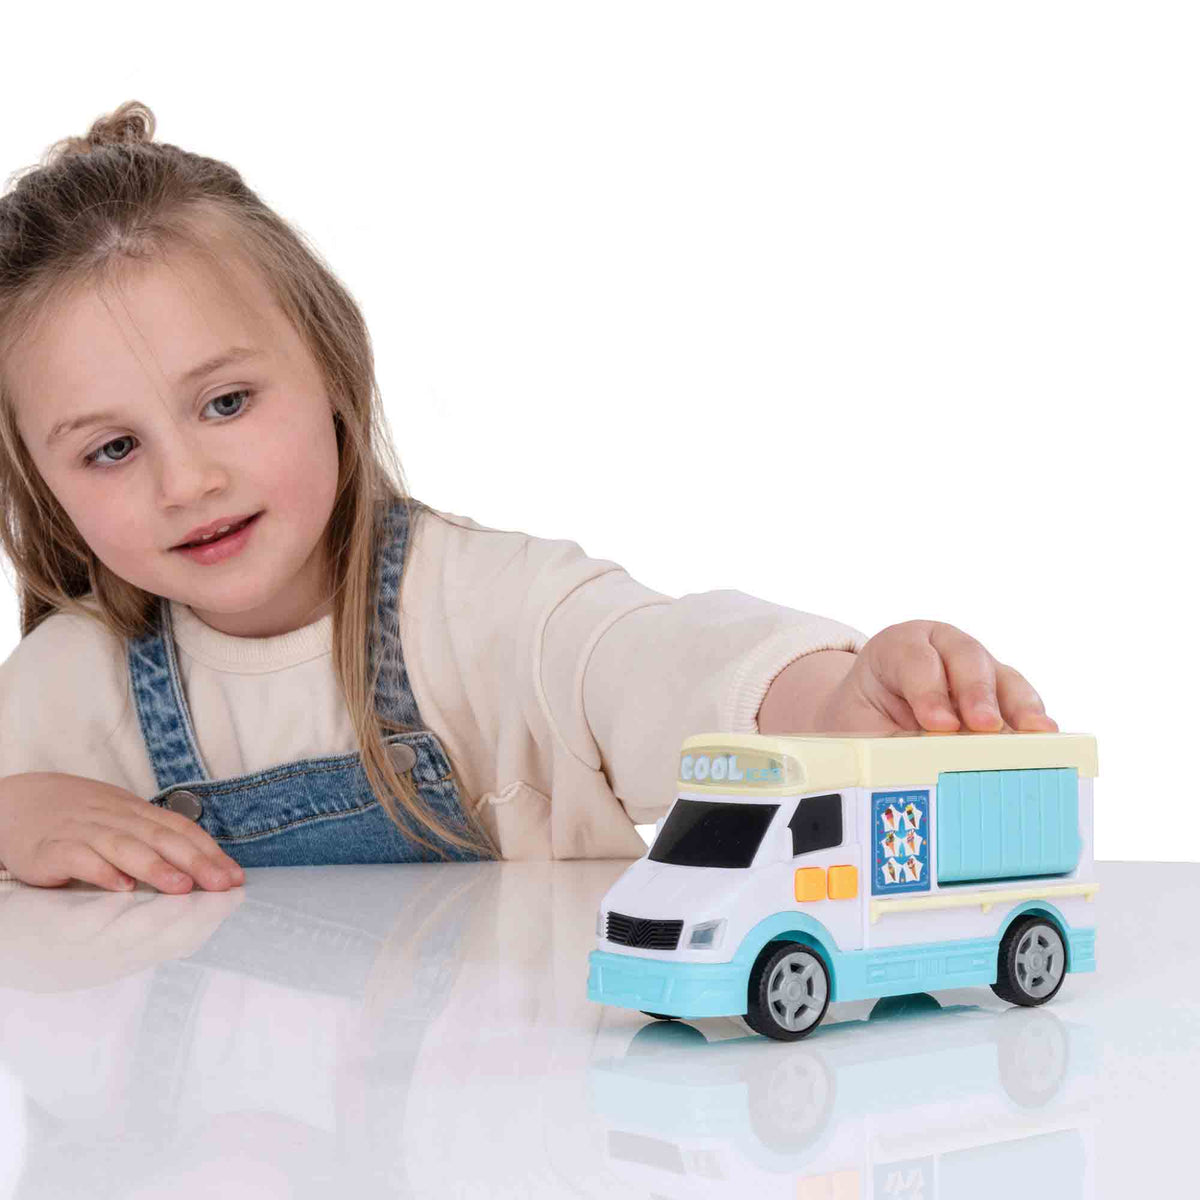 Teamsterz Mighty Machines Small Ice Cream Van Toy